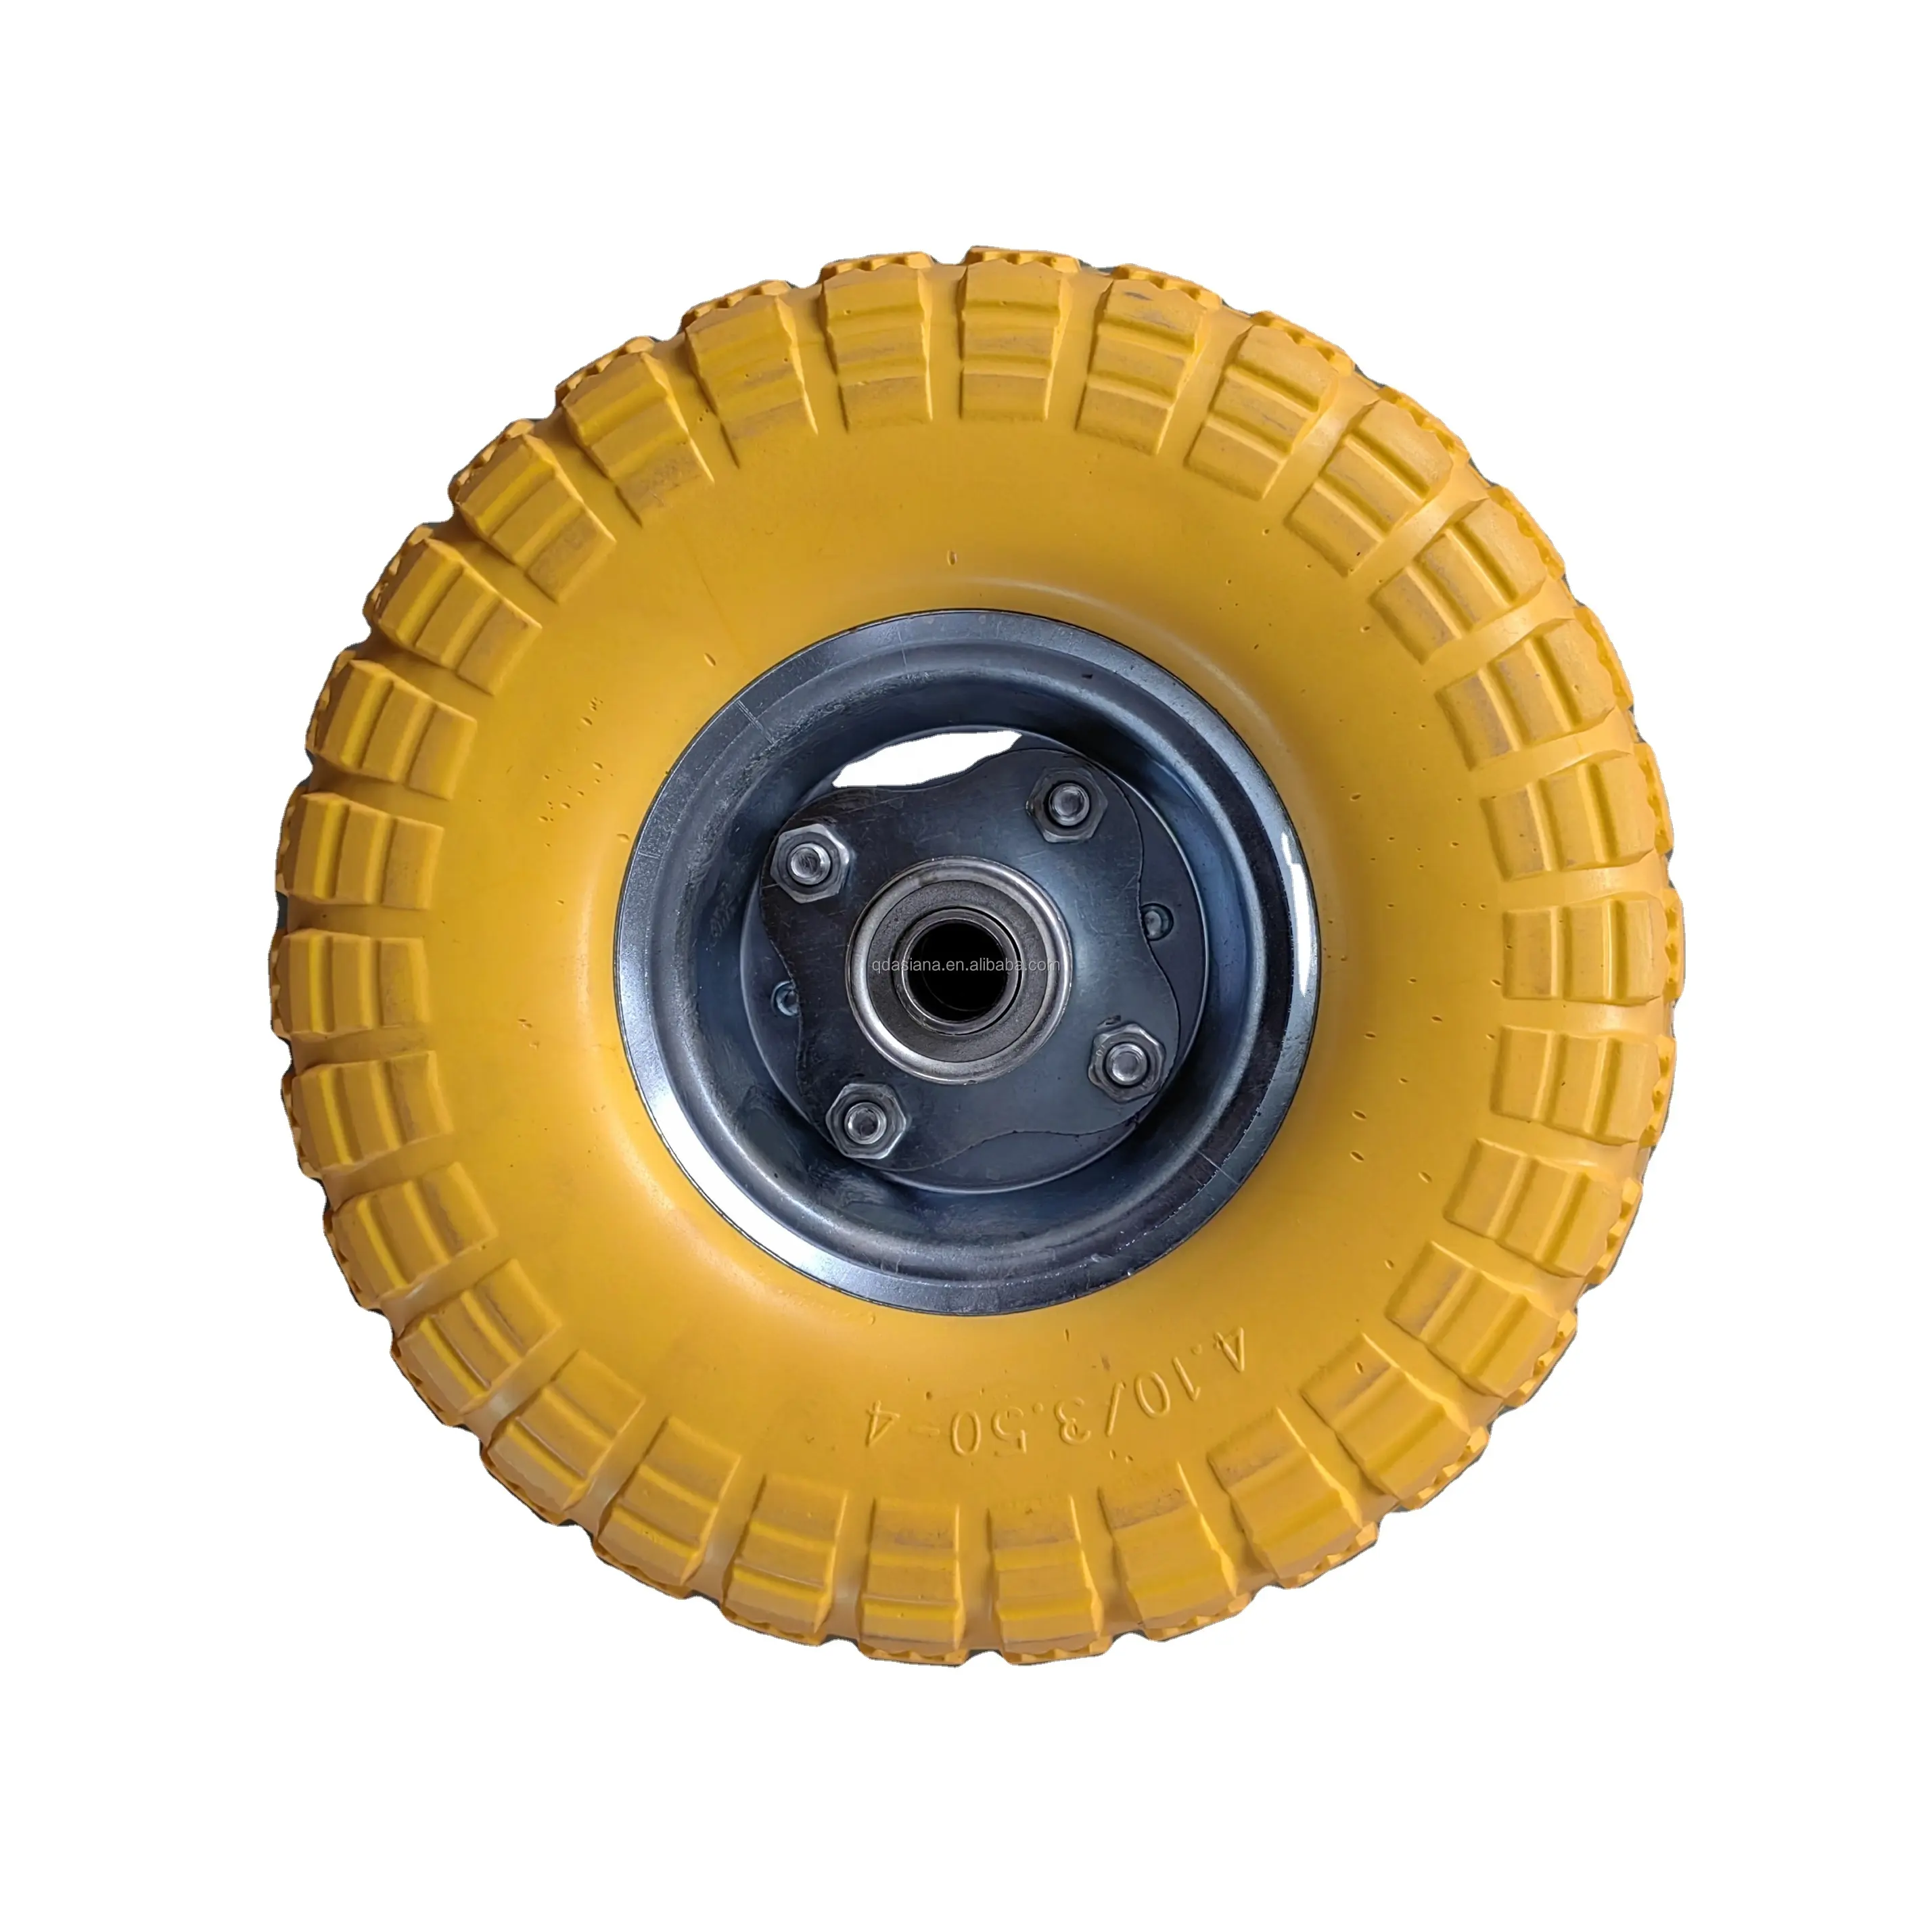 10 Inch PU Foam Wheels With Steel Rim Replacement Wheel For Hand Trolley Cart